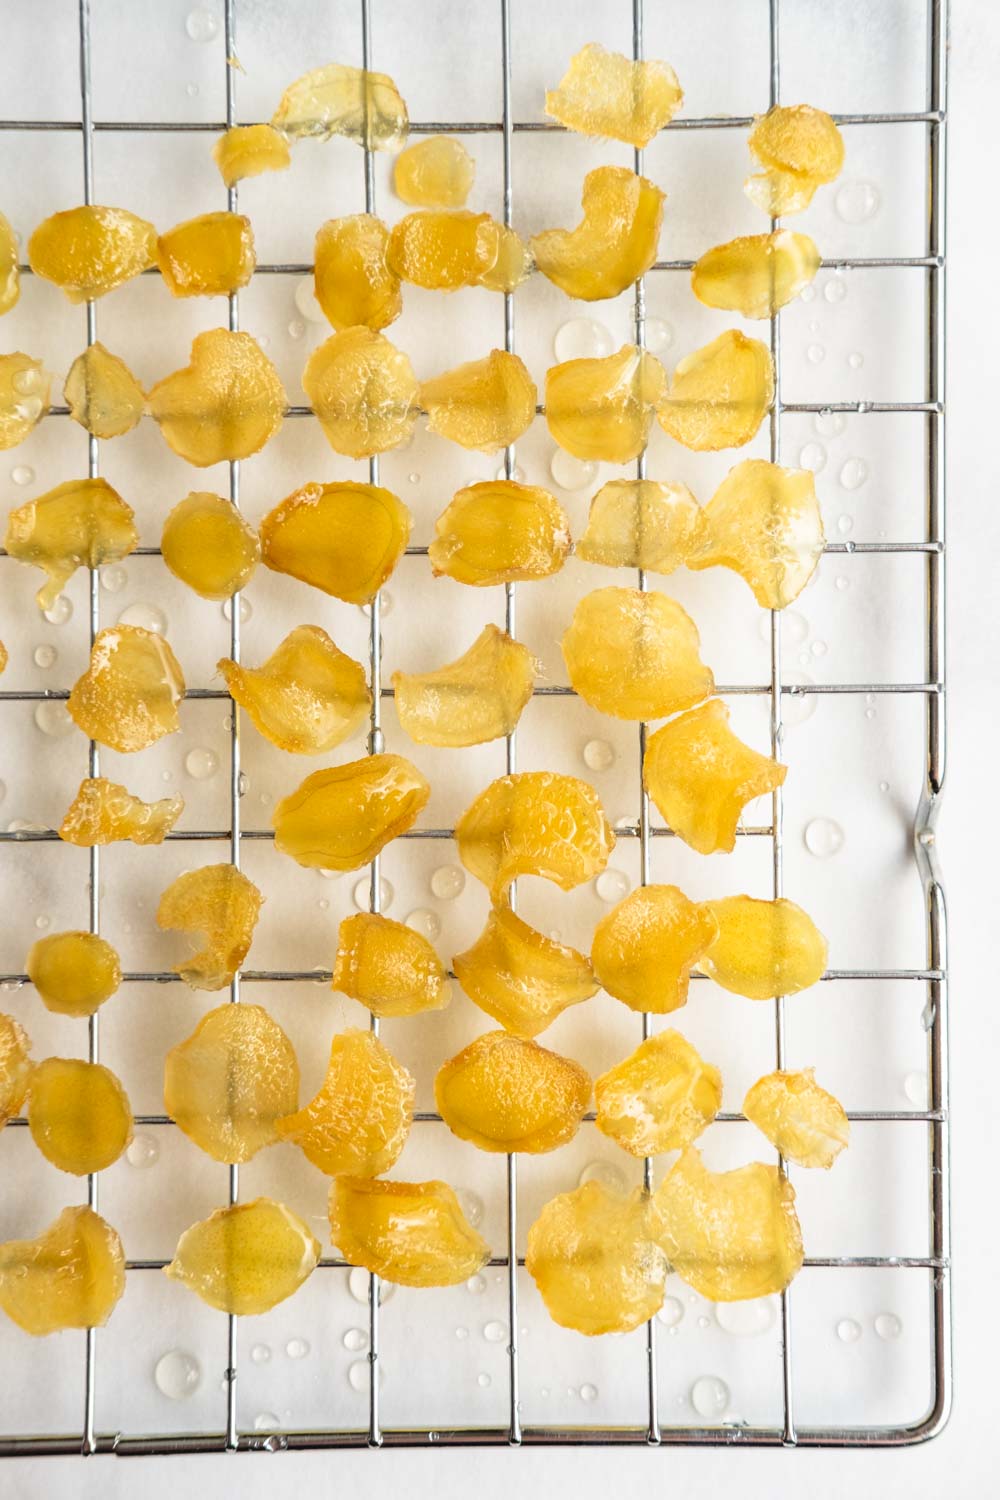 The the candied ginger slices to dry before coating with sugar.